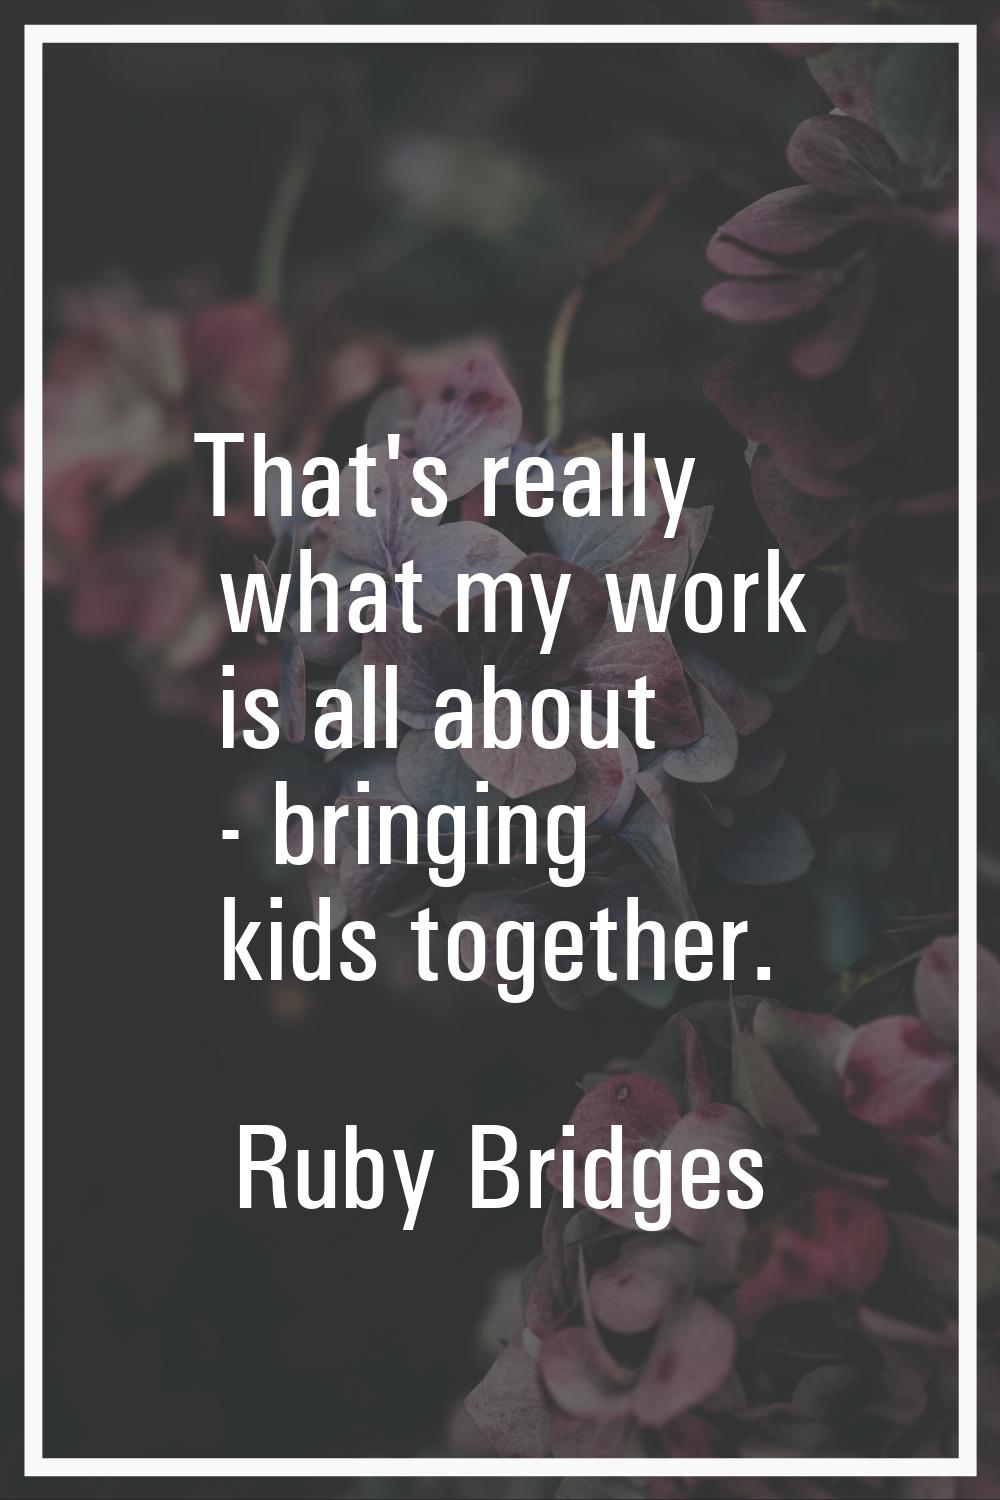 That's really what my work is all about - bringing kids together.